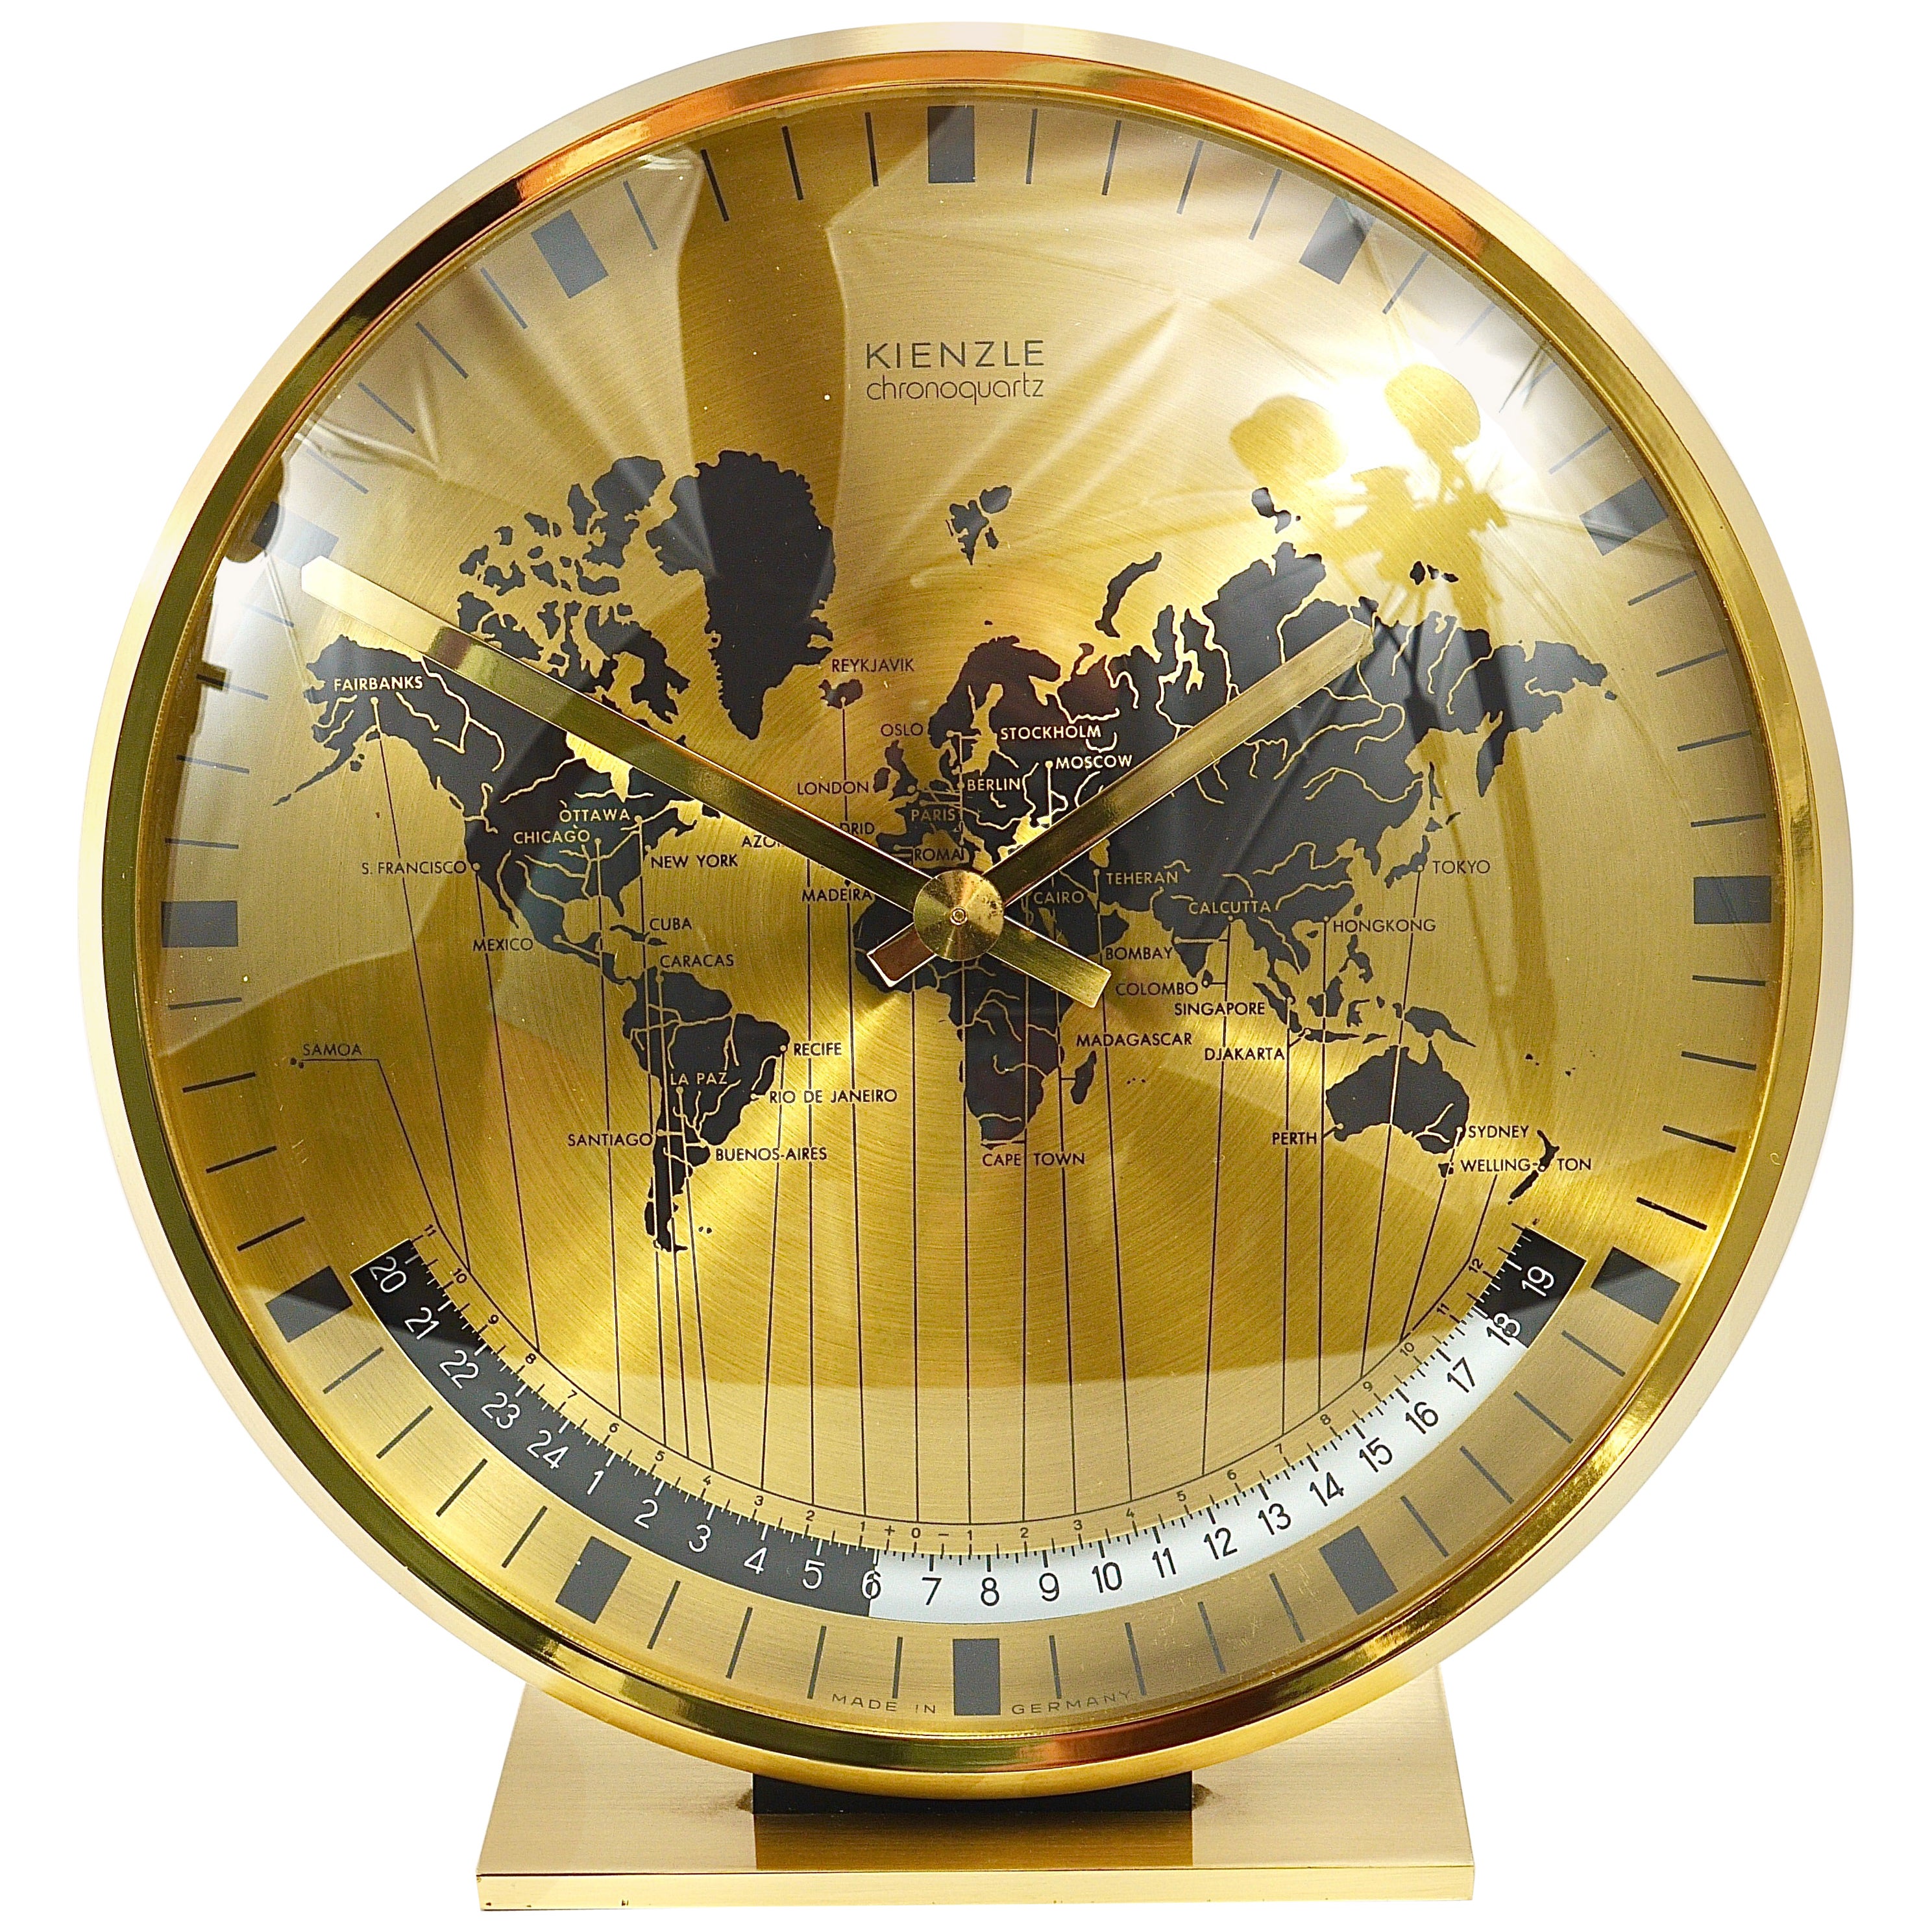 Kienzle GMT World Time Zone Brass Table Clock, Midcentury, Germany, 1960s For Sale